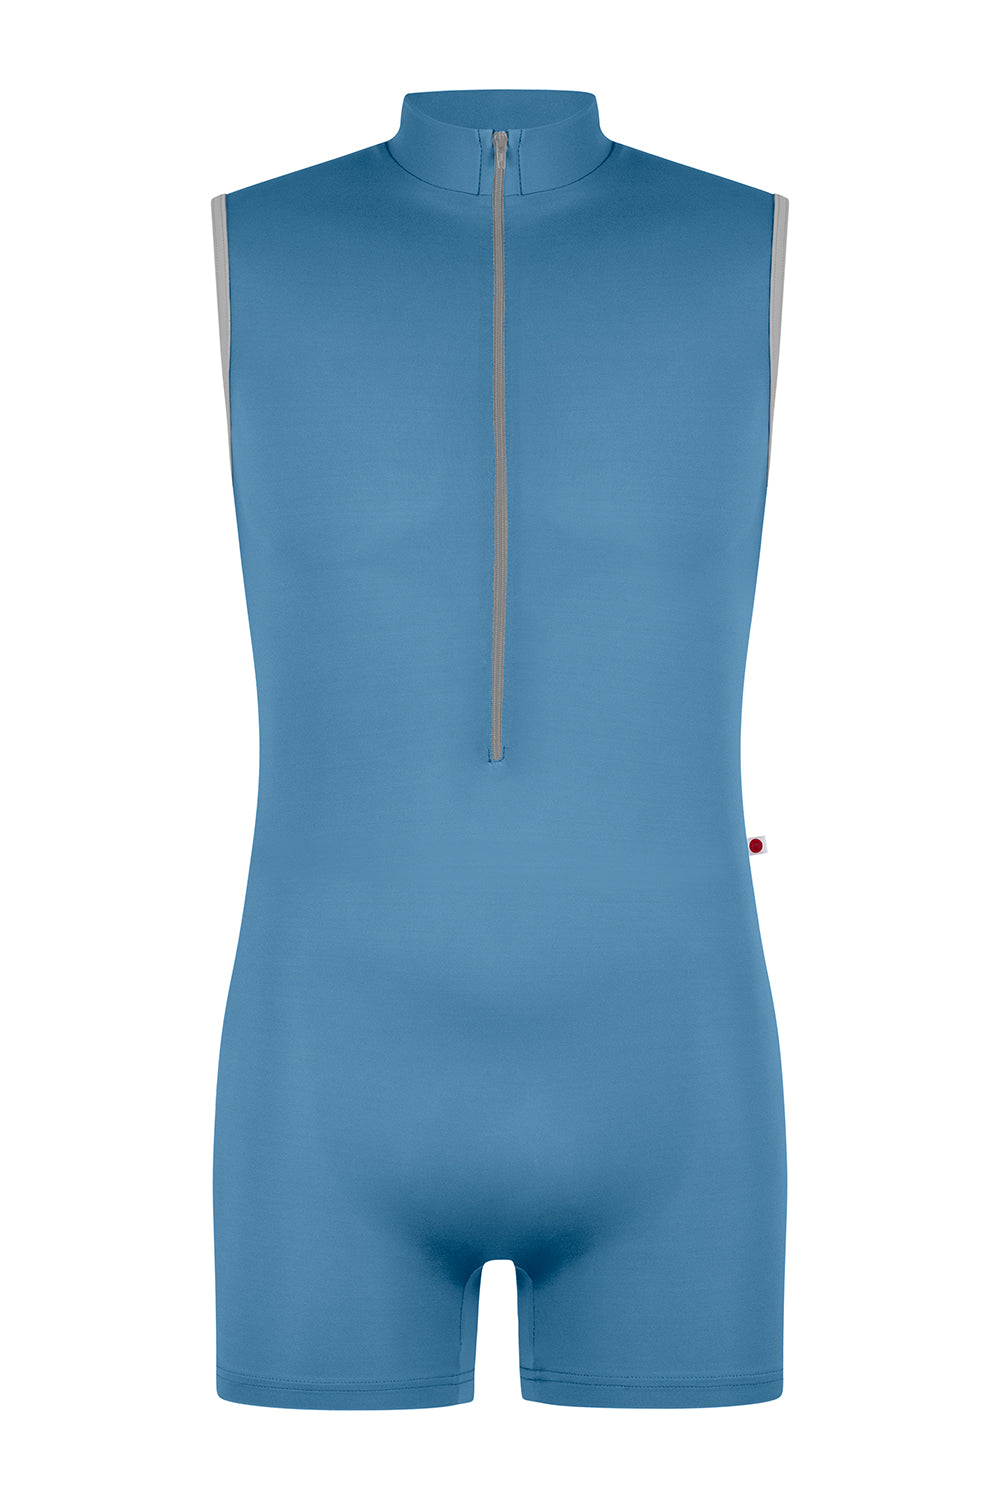 Victor semi-unitard in T-Bluebell body color with N-Silver trim color